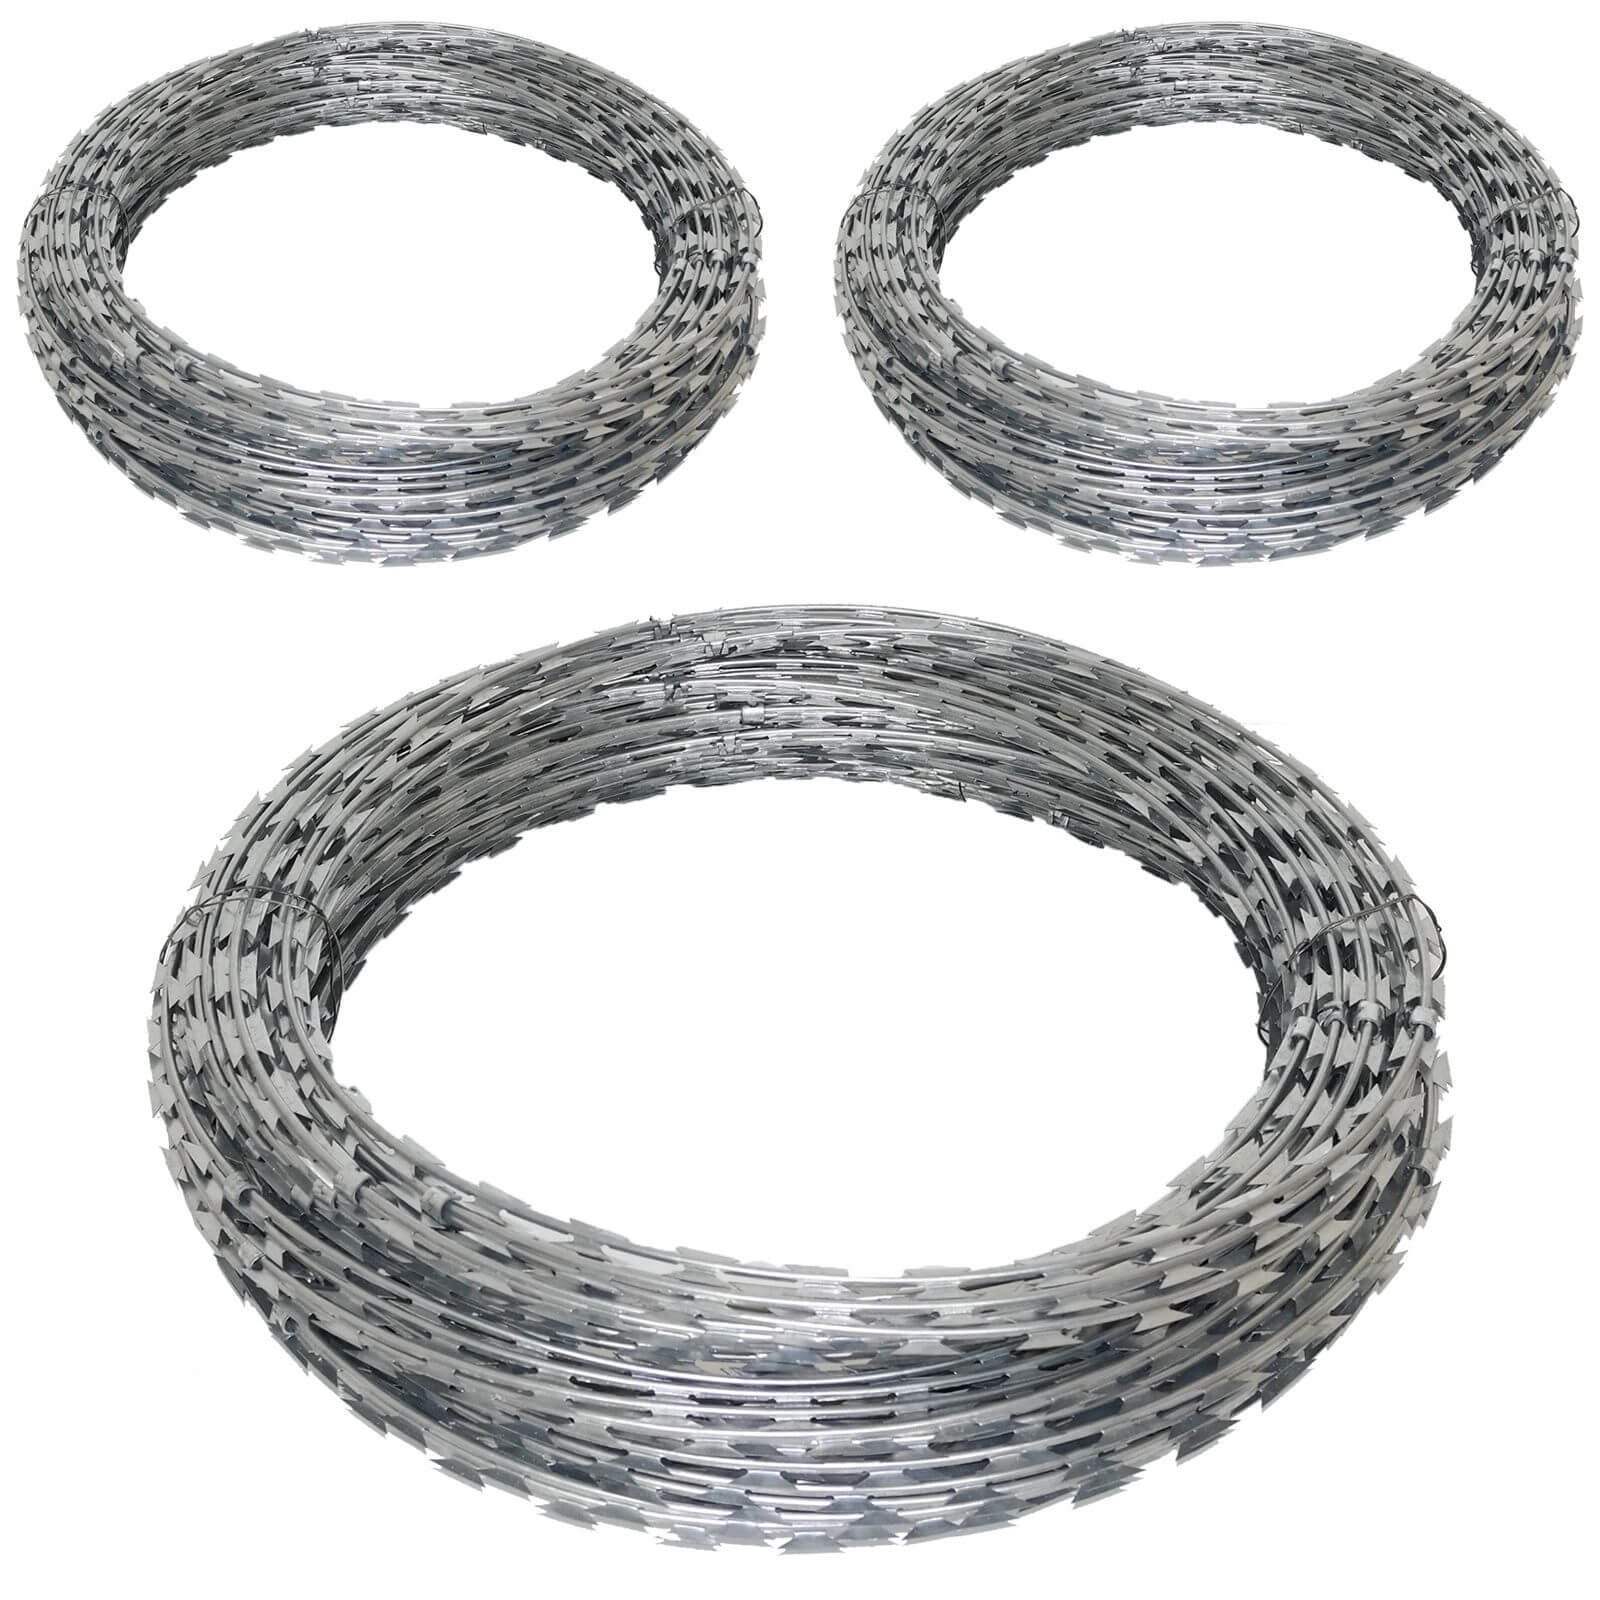 Protect your property with the strength of razor wire fencing